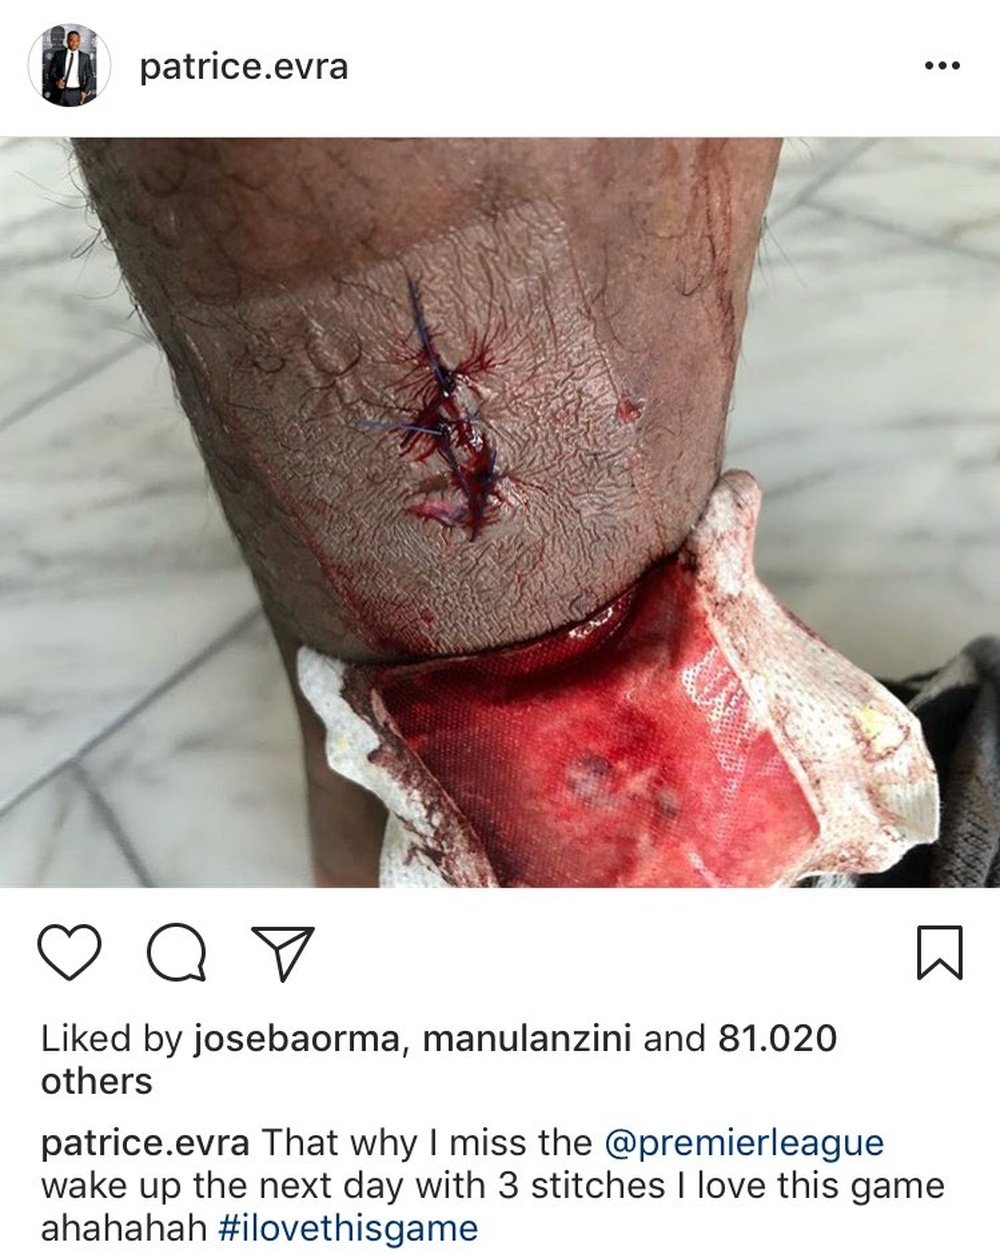 The Frenchman showed off his wound on social media. Instagram/Evra